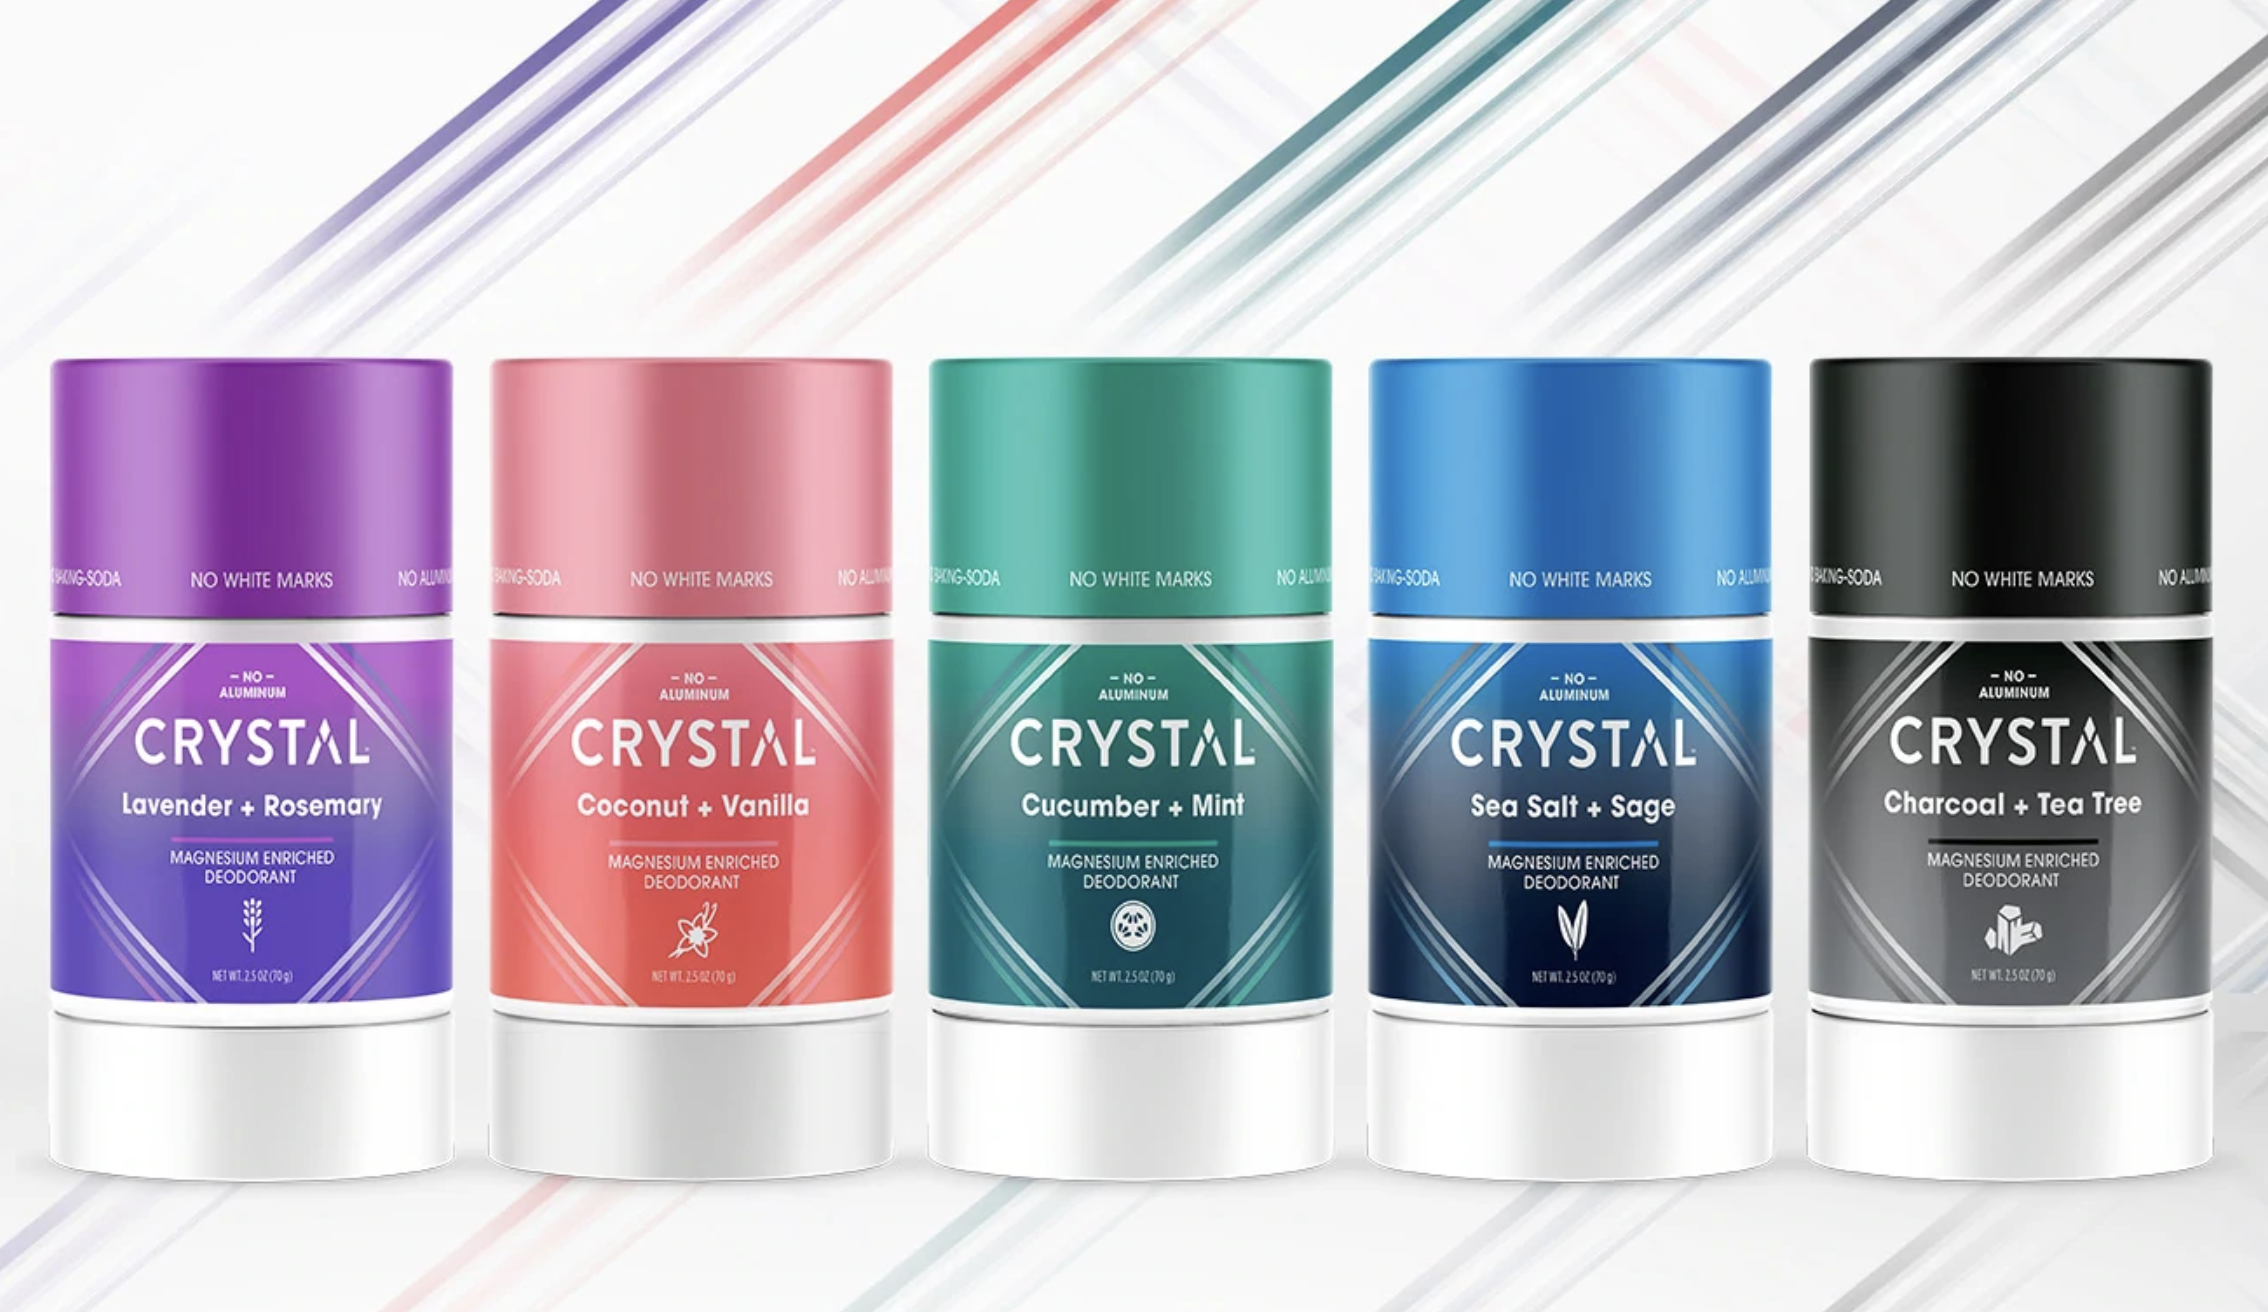 Must-Have CRYSTAL Magnesium Deodorant Is Gentle On The Skin LATF NEWS